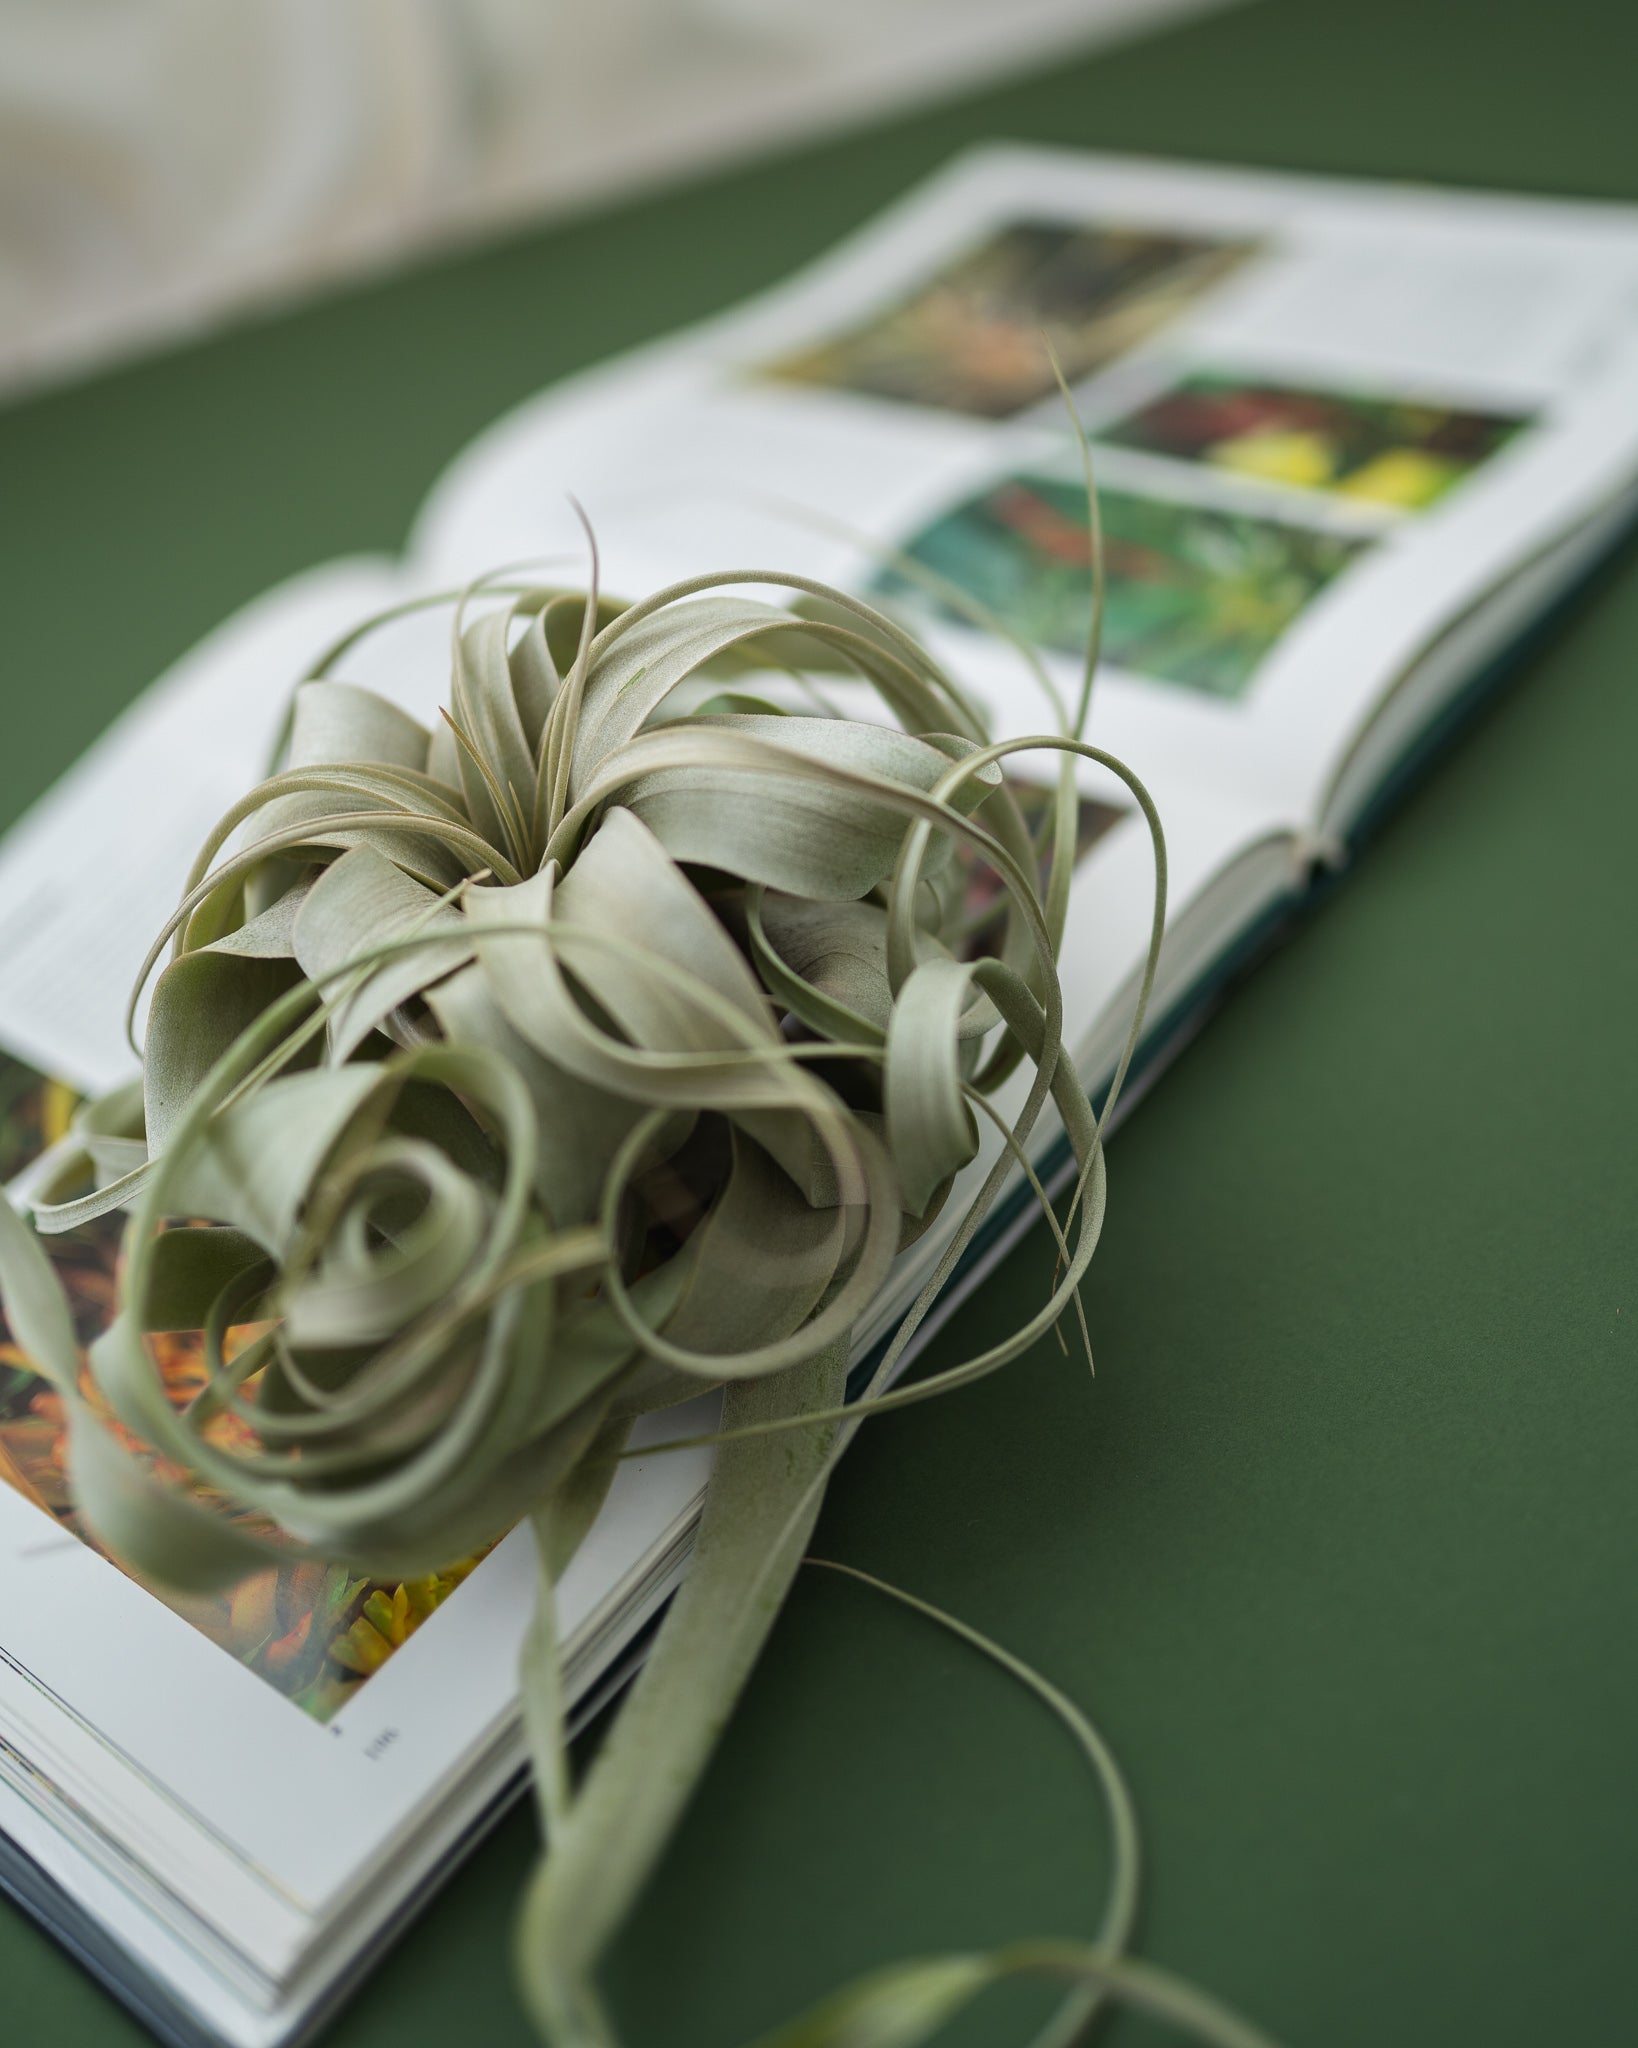 Tillandsia Xerographica Air Plant Displayed on an Open Book